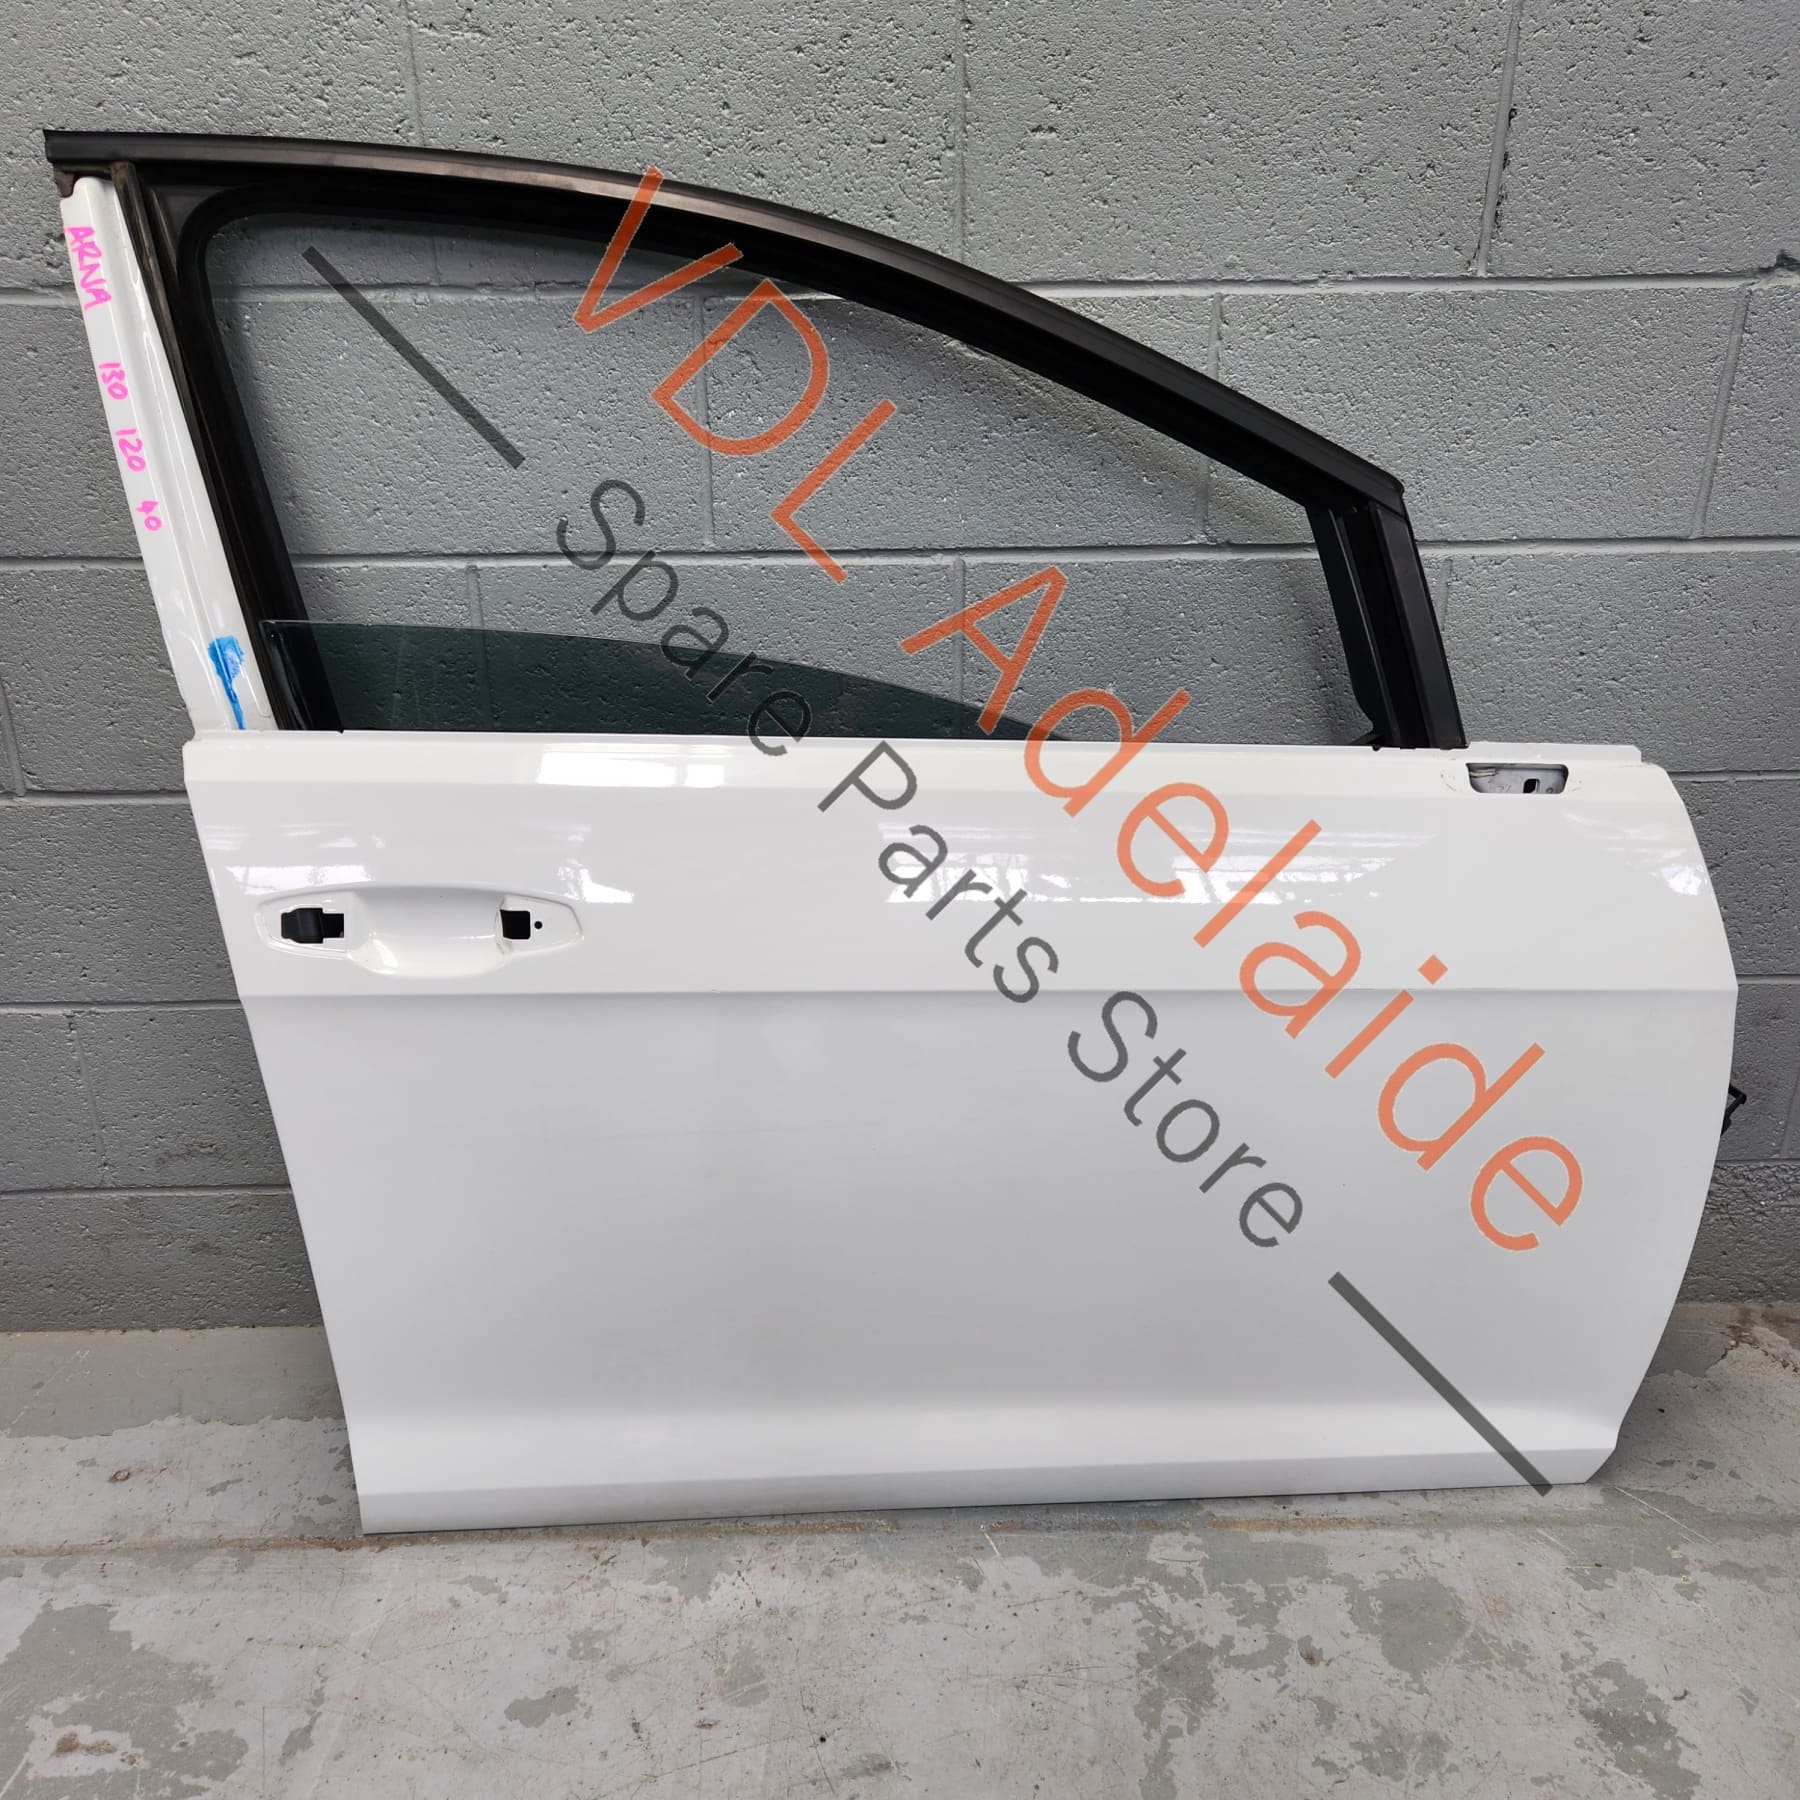 5G4831056AR 5G4831056AS 5G4845202B  VW Golf MK7 Front Right Door Shell Panel 5G4831056AR Pure White 0Q C9A